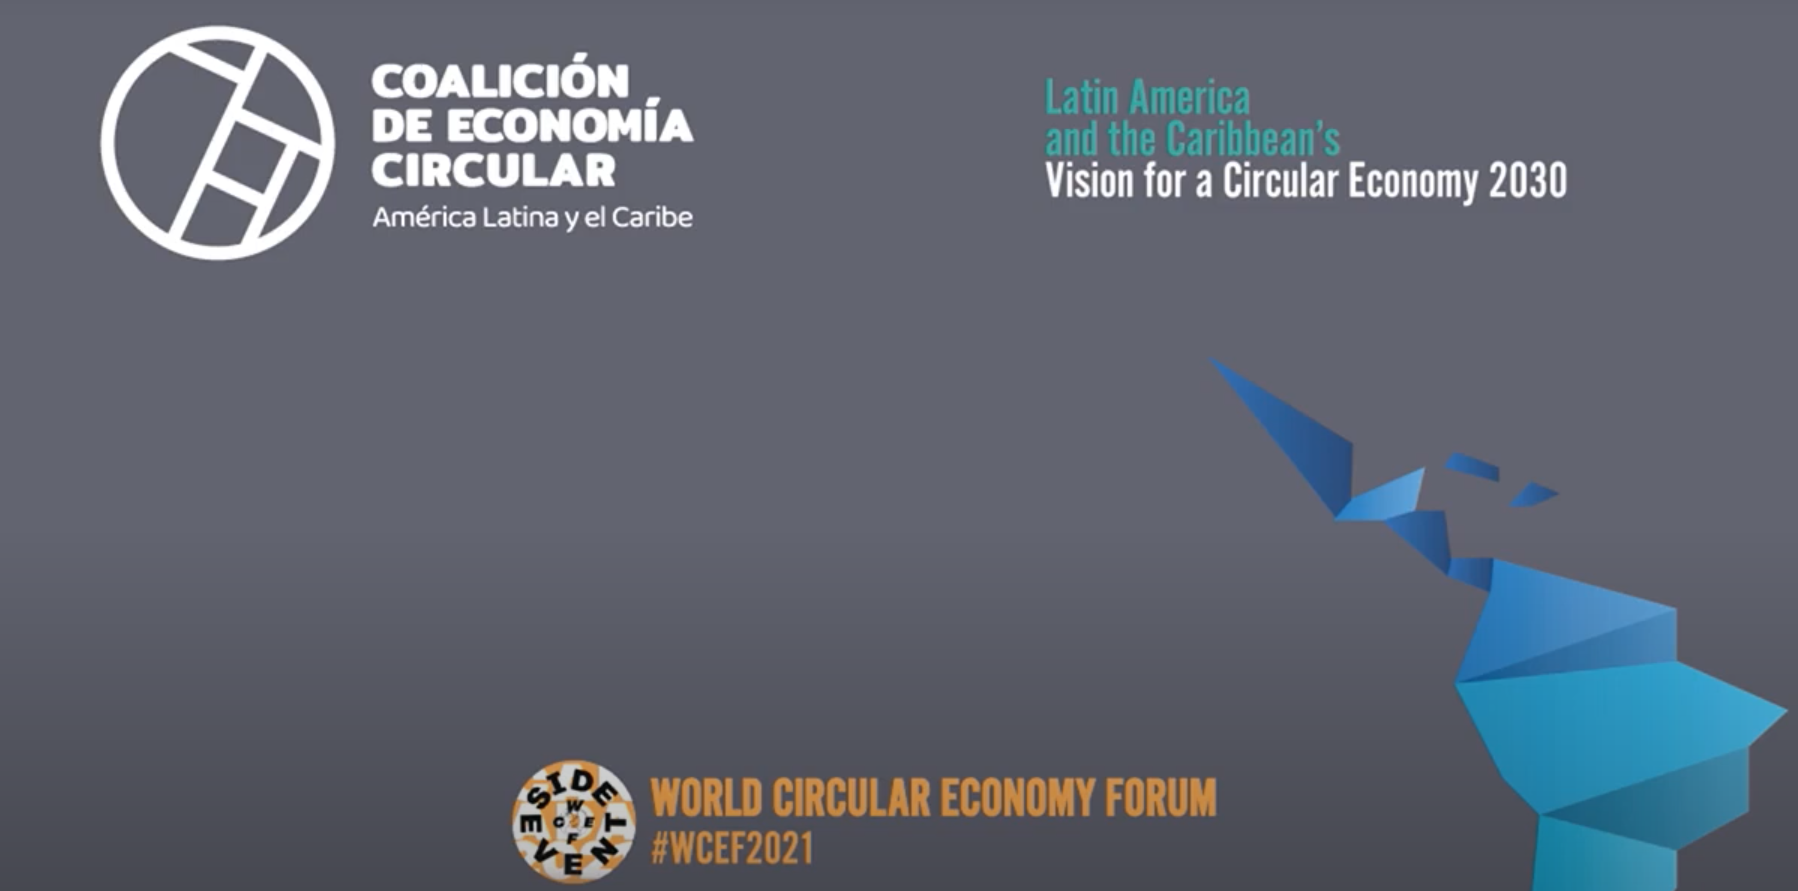 Advancing towards a common vision for Circular Economy in the region 2030